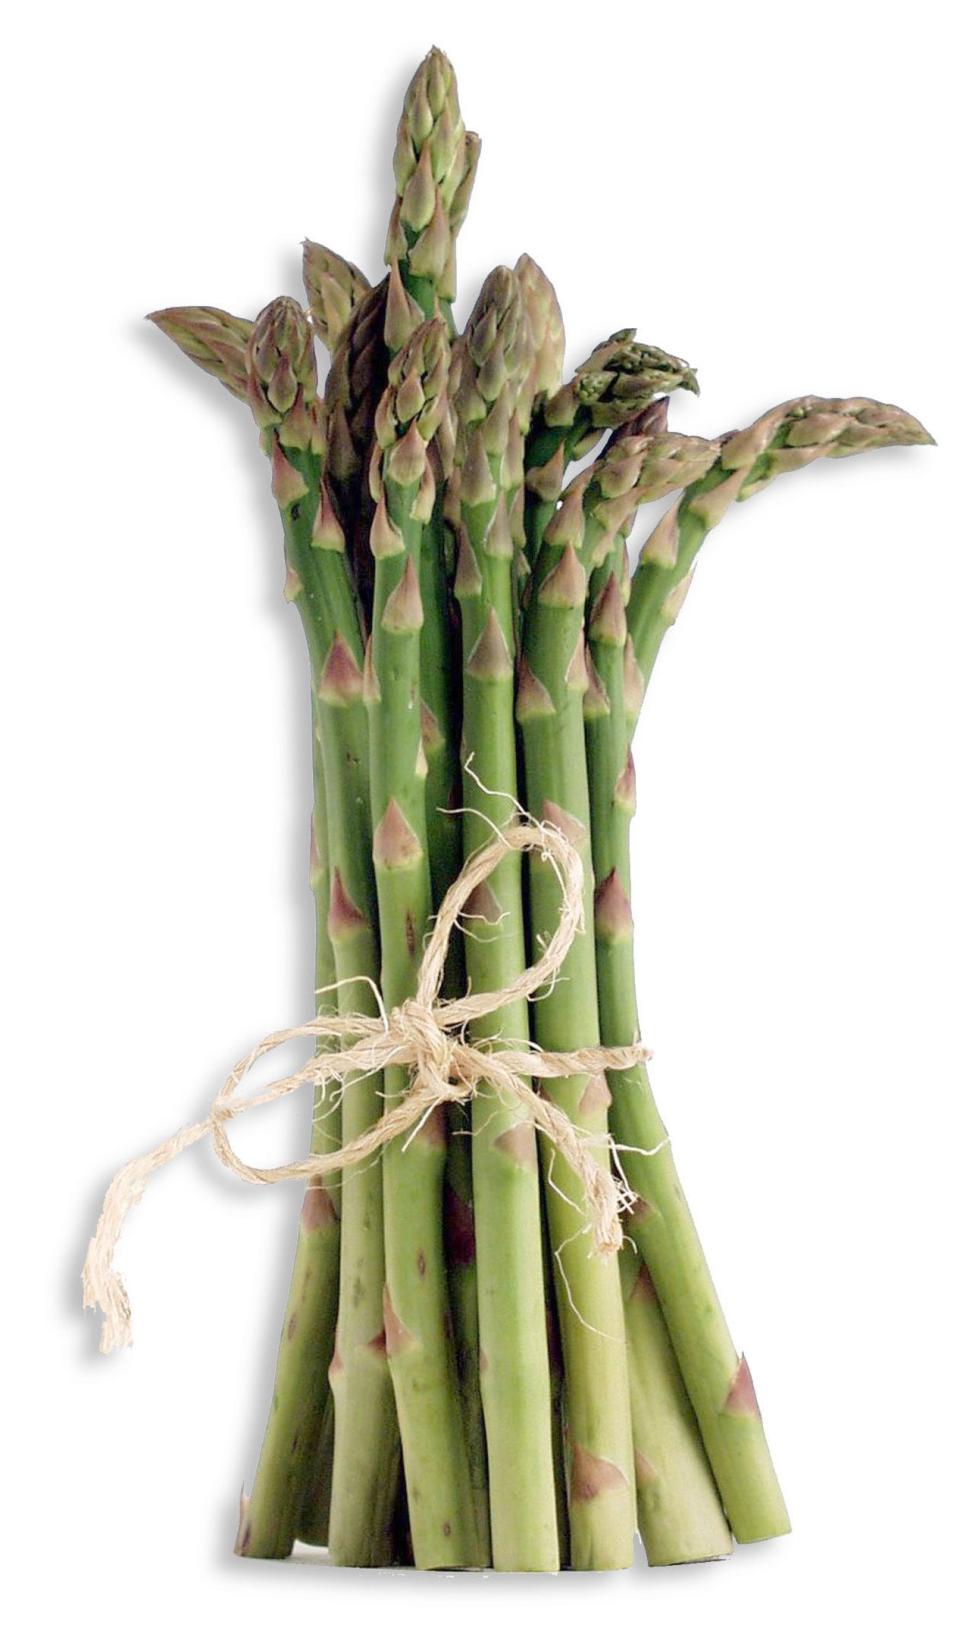 Asparagus is the star of West Brookfield during its annual festival.